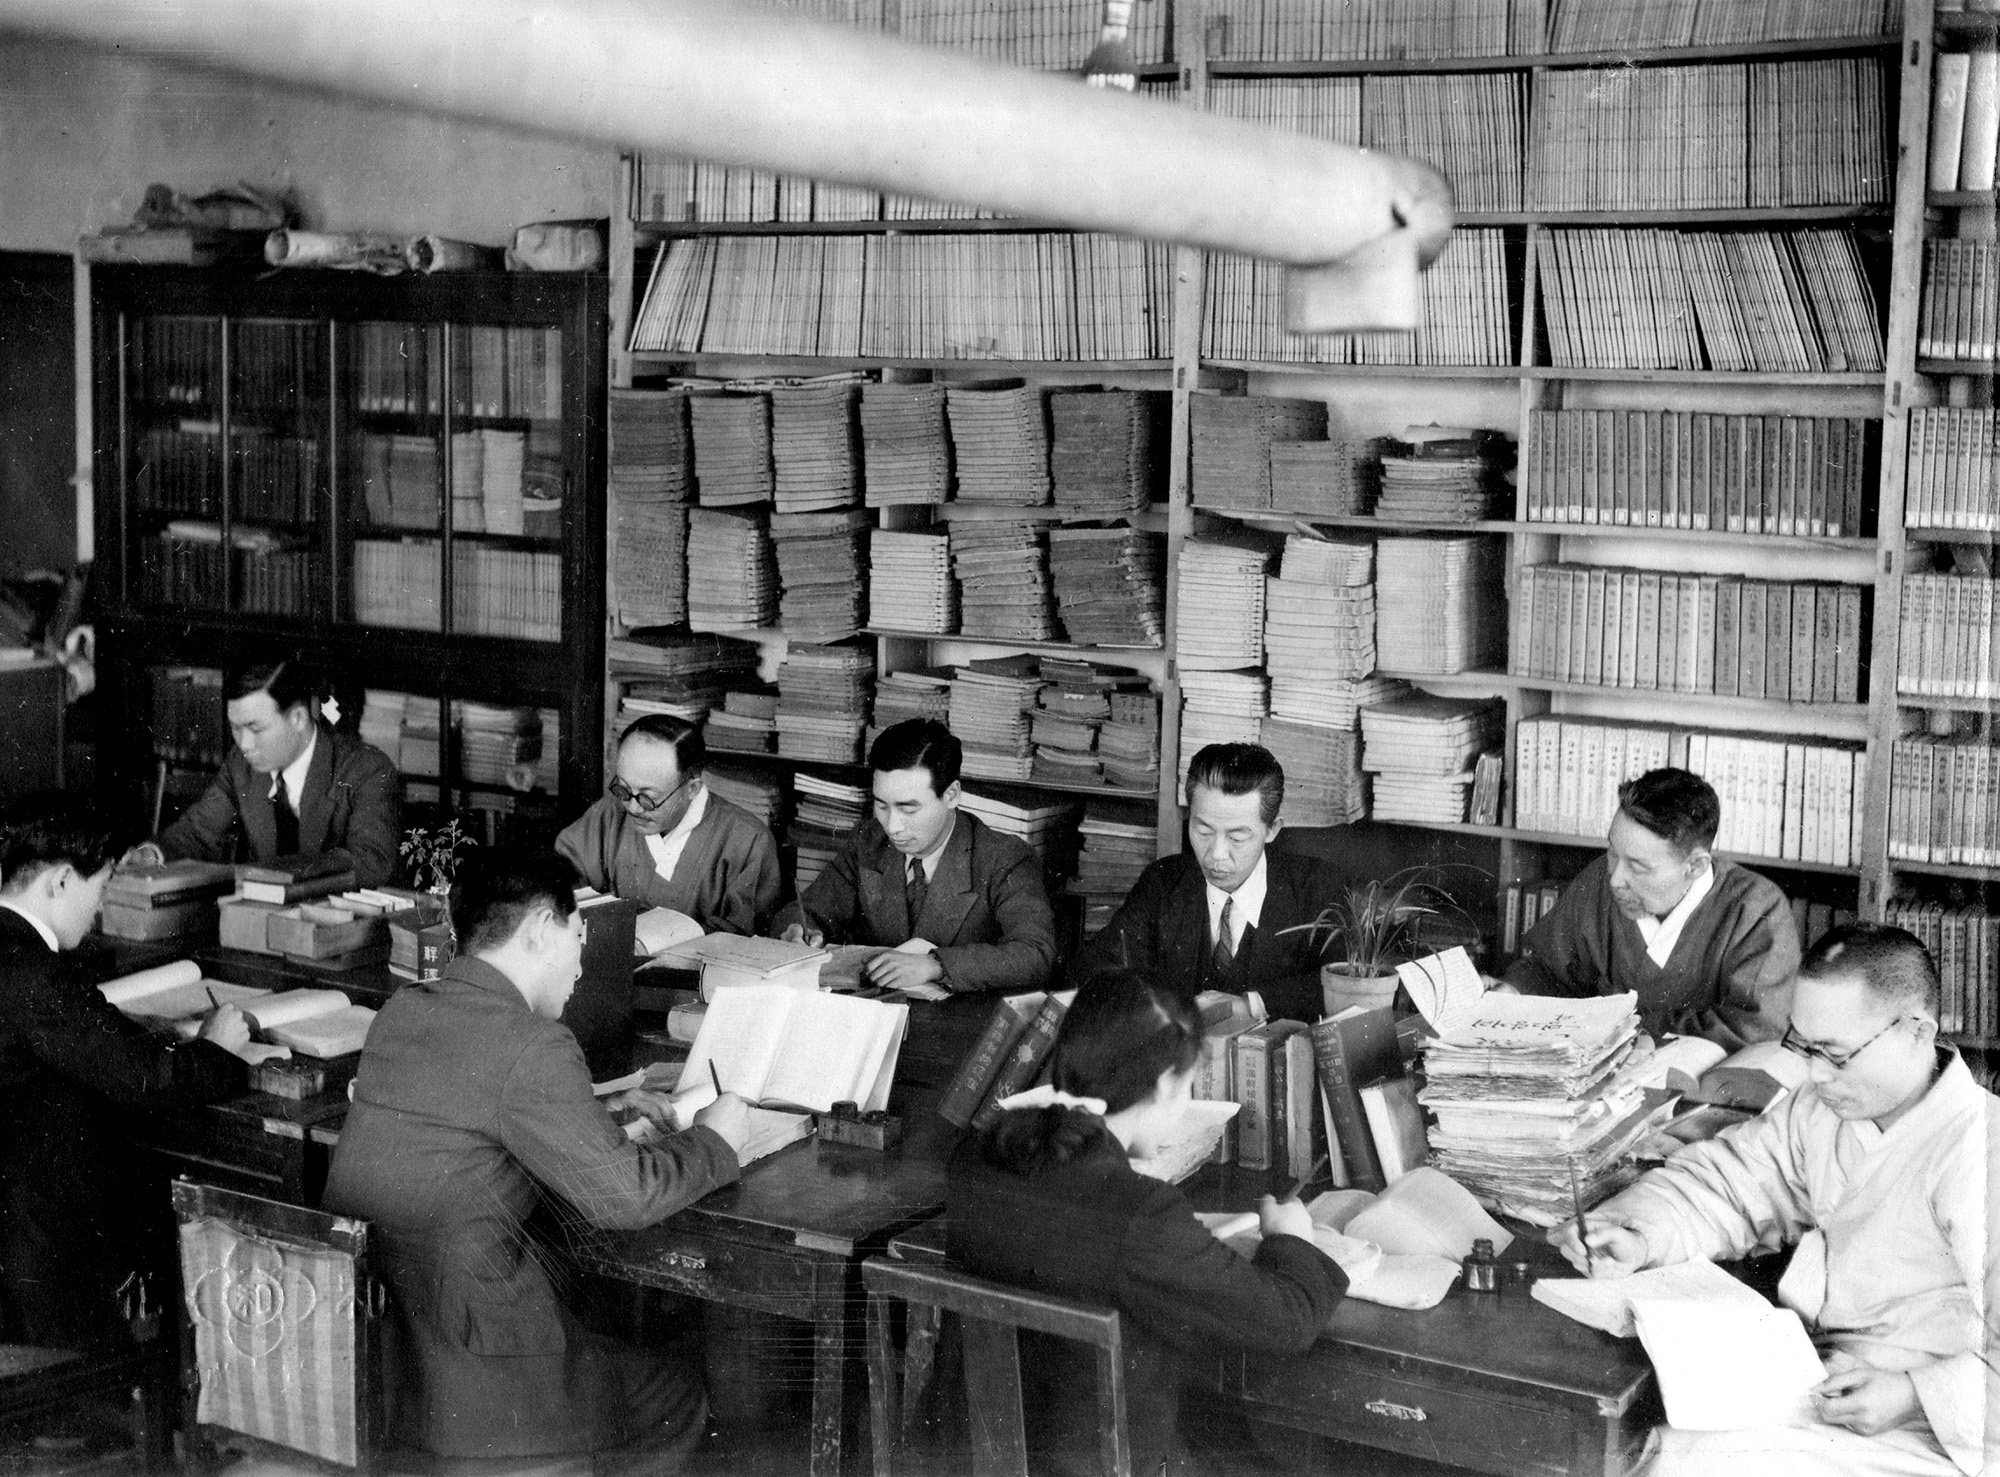 "Action shot of the Dictionary staff. Korean Language Research Society, Seoul, Korea." - caption on the back of the photograph